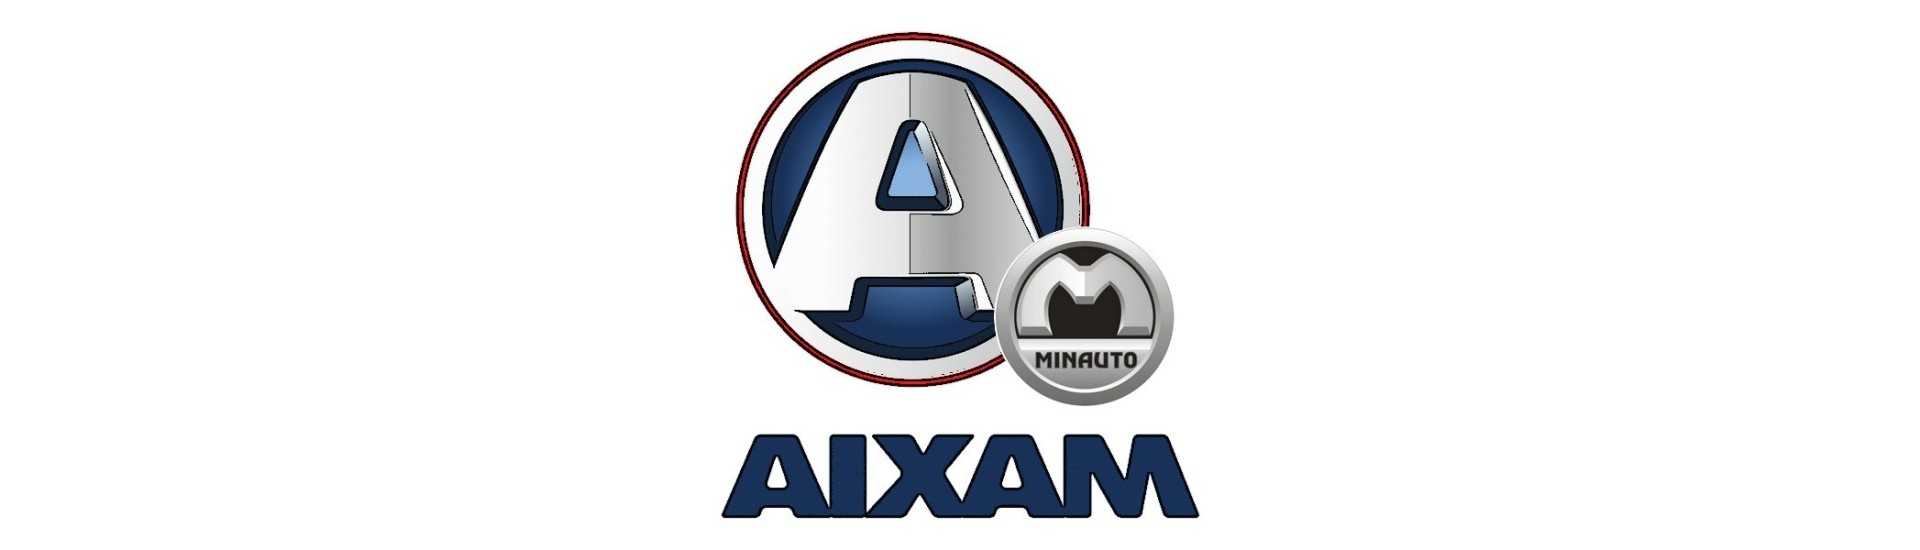 Neiman and barrel at the best price for car without a permit Aixam Minauto